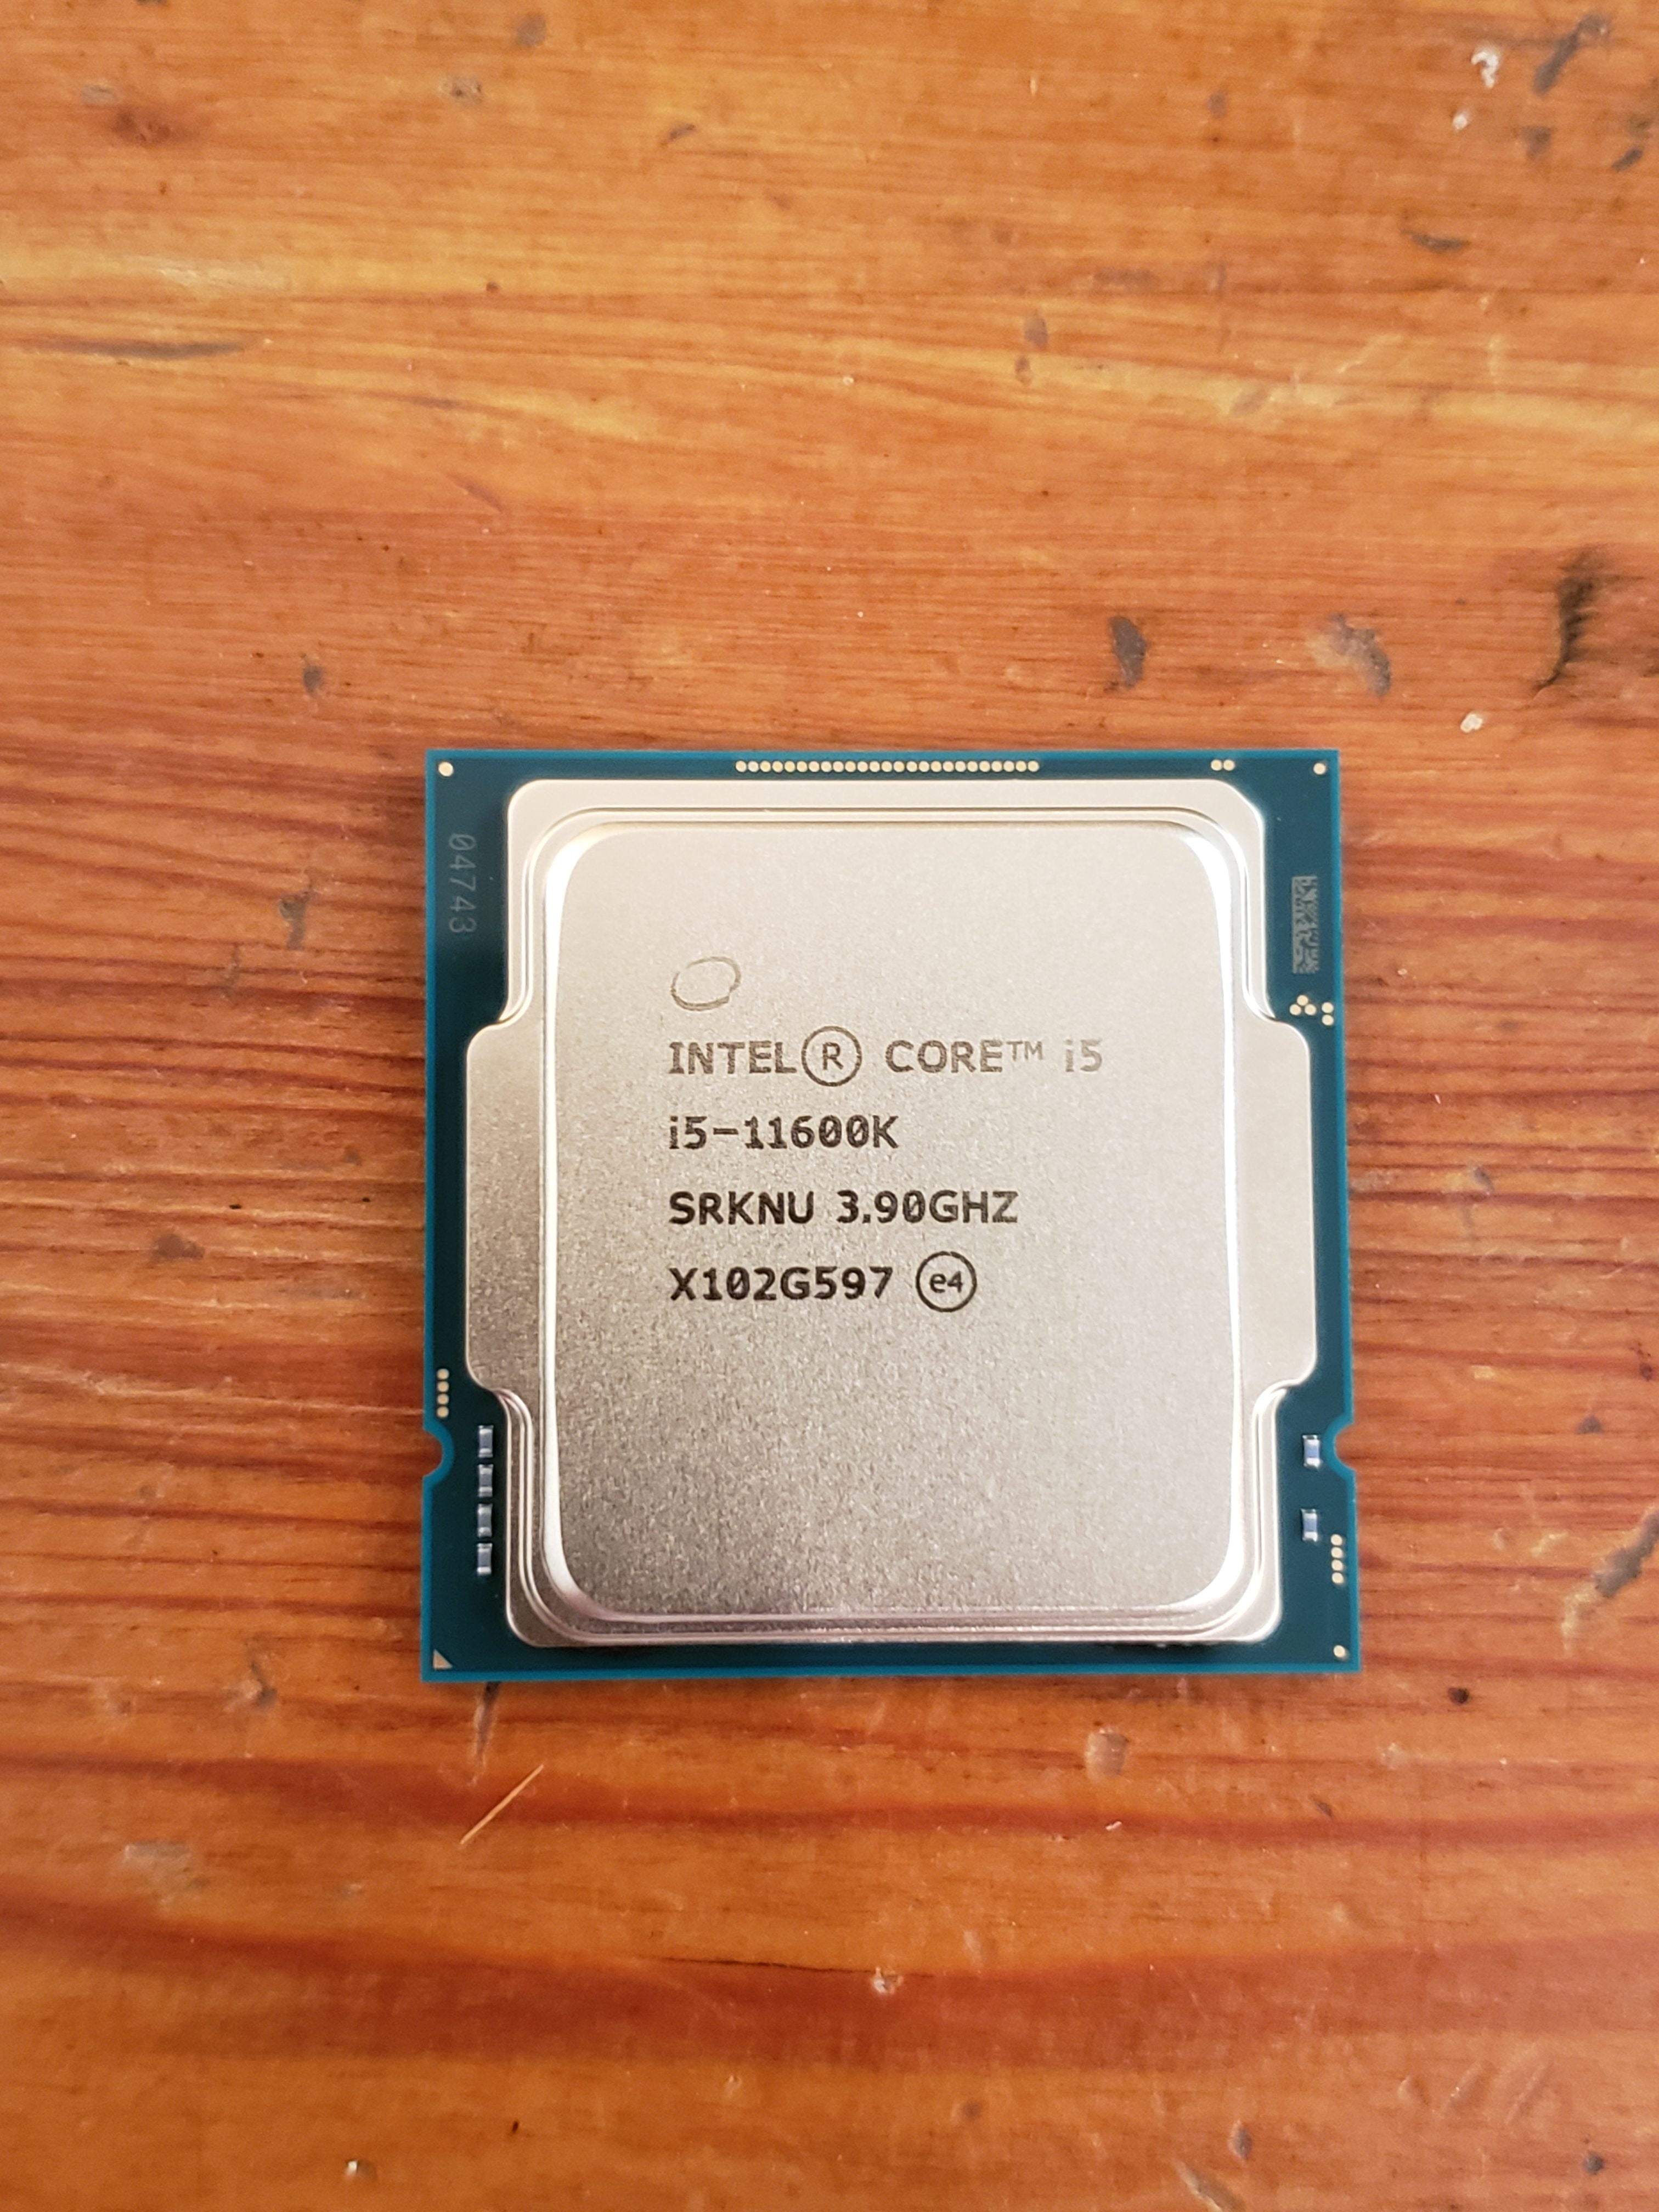 Intel Core I5 11600k Review Benchmarks And Comparisons Art Of Pc 7812